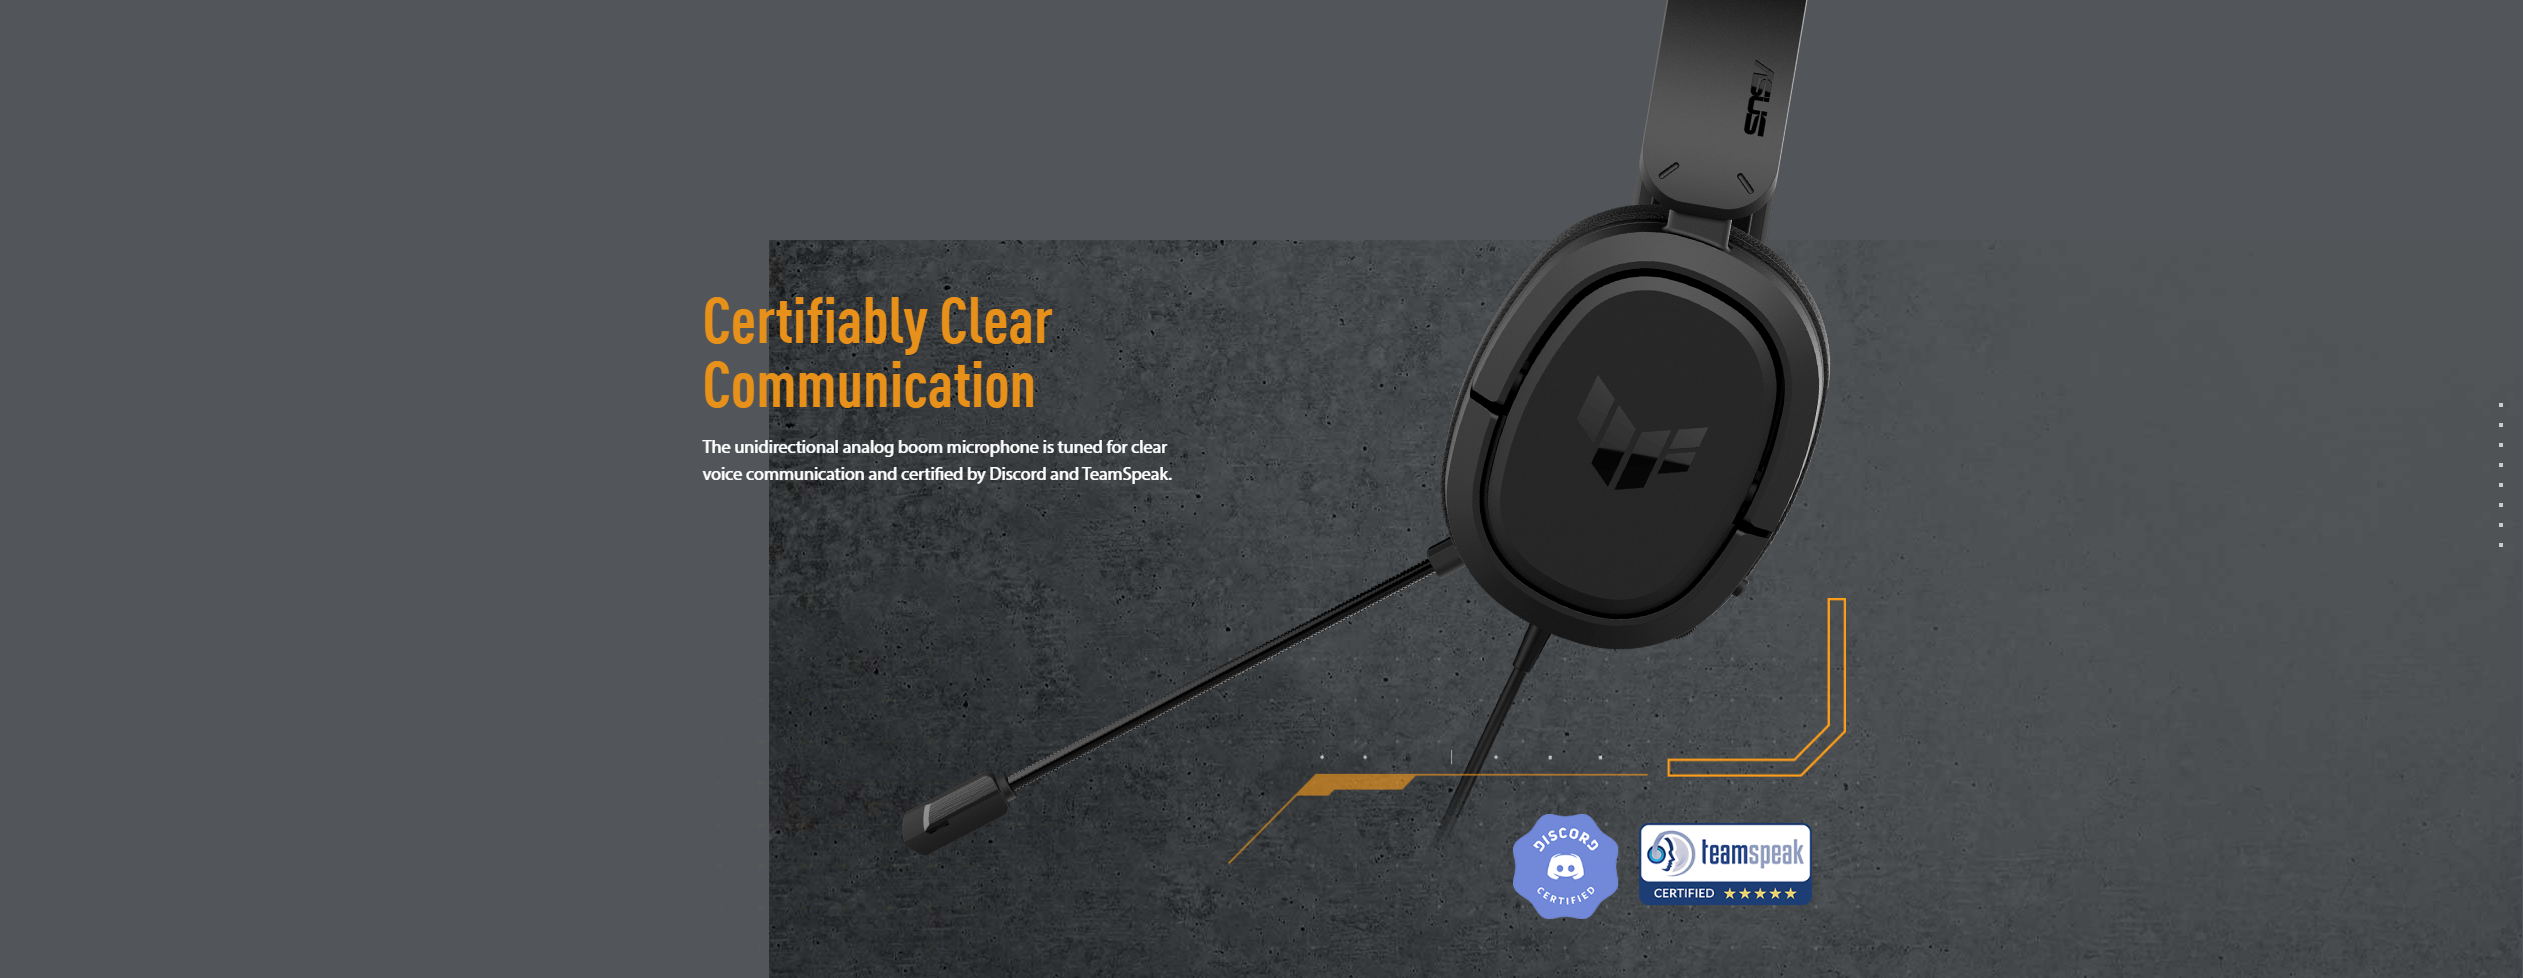 A large marketing image providing additional information about the product ASUS TUF Gaming H1 Wired Gaming Headset - Additional alt info not provided